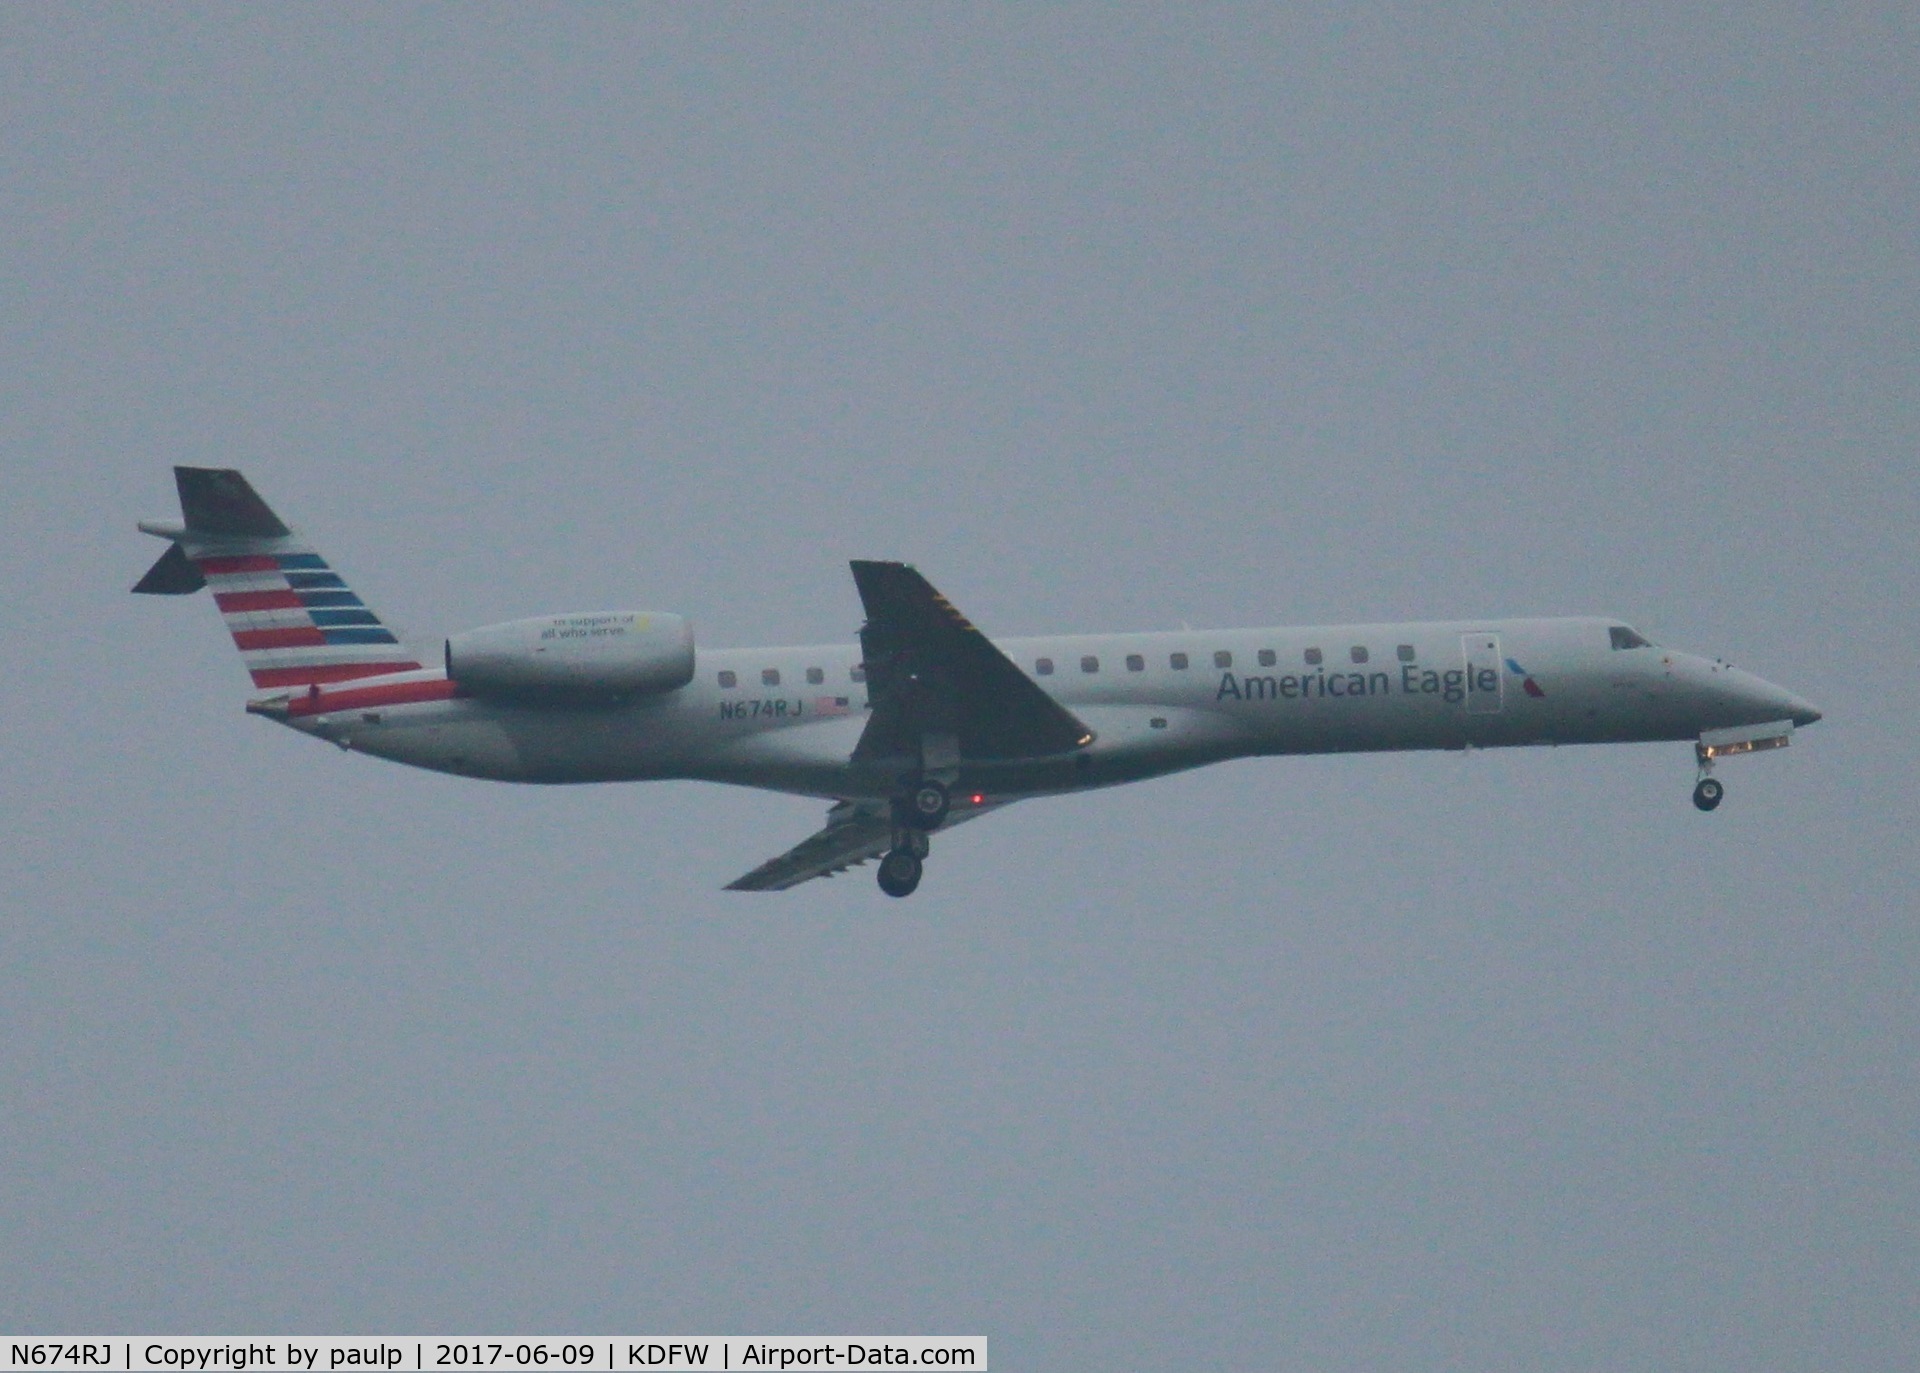 N674RJ, 2004 Embraer ERJ-145LR (EMB-145LR) C/N 14500801, At DFW. After a 45 minute hold because of severe storms, starting to land in heavy rain.